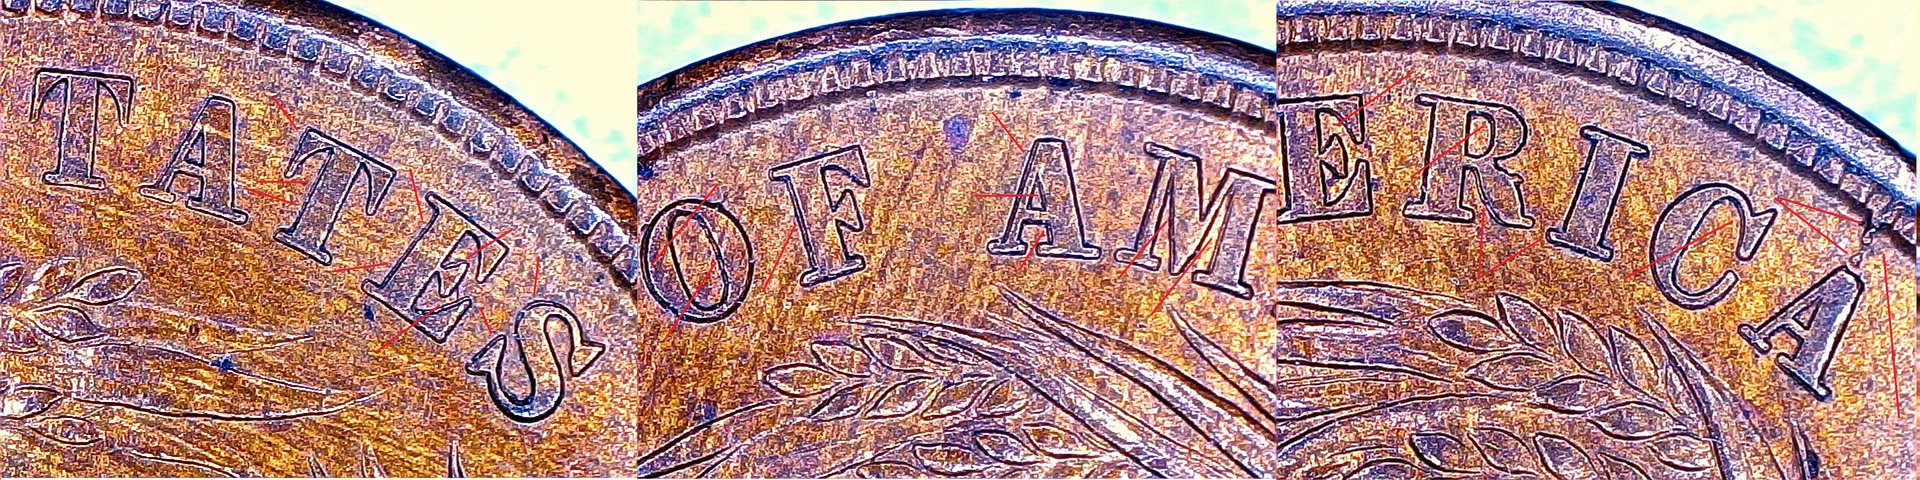 1864 Two Cent Piece Lg Motto Au Mint Error Repunched Date Cracked Die Cuds  Rorate 170'.jpg